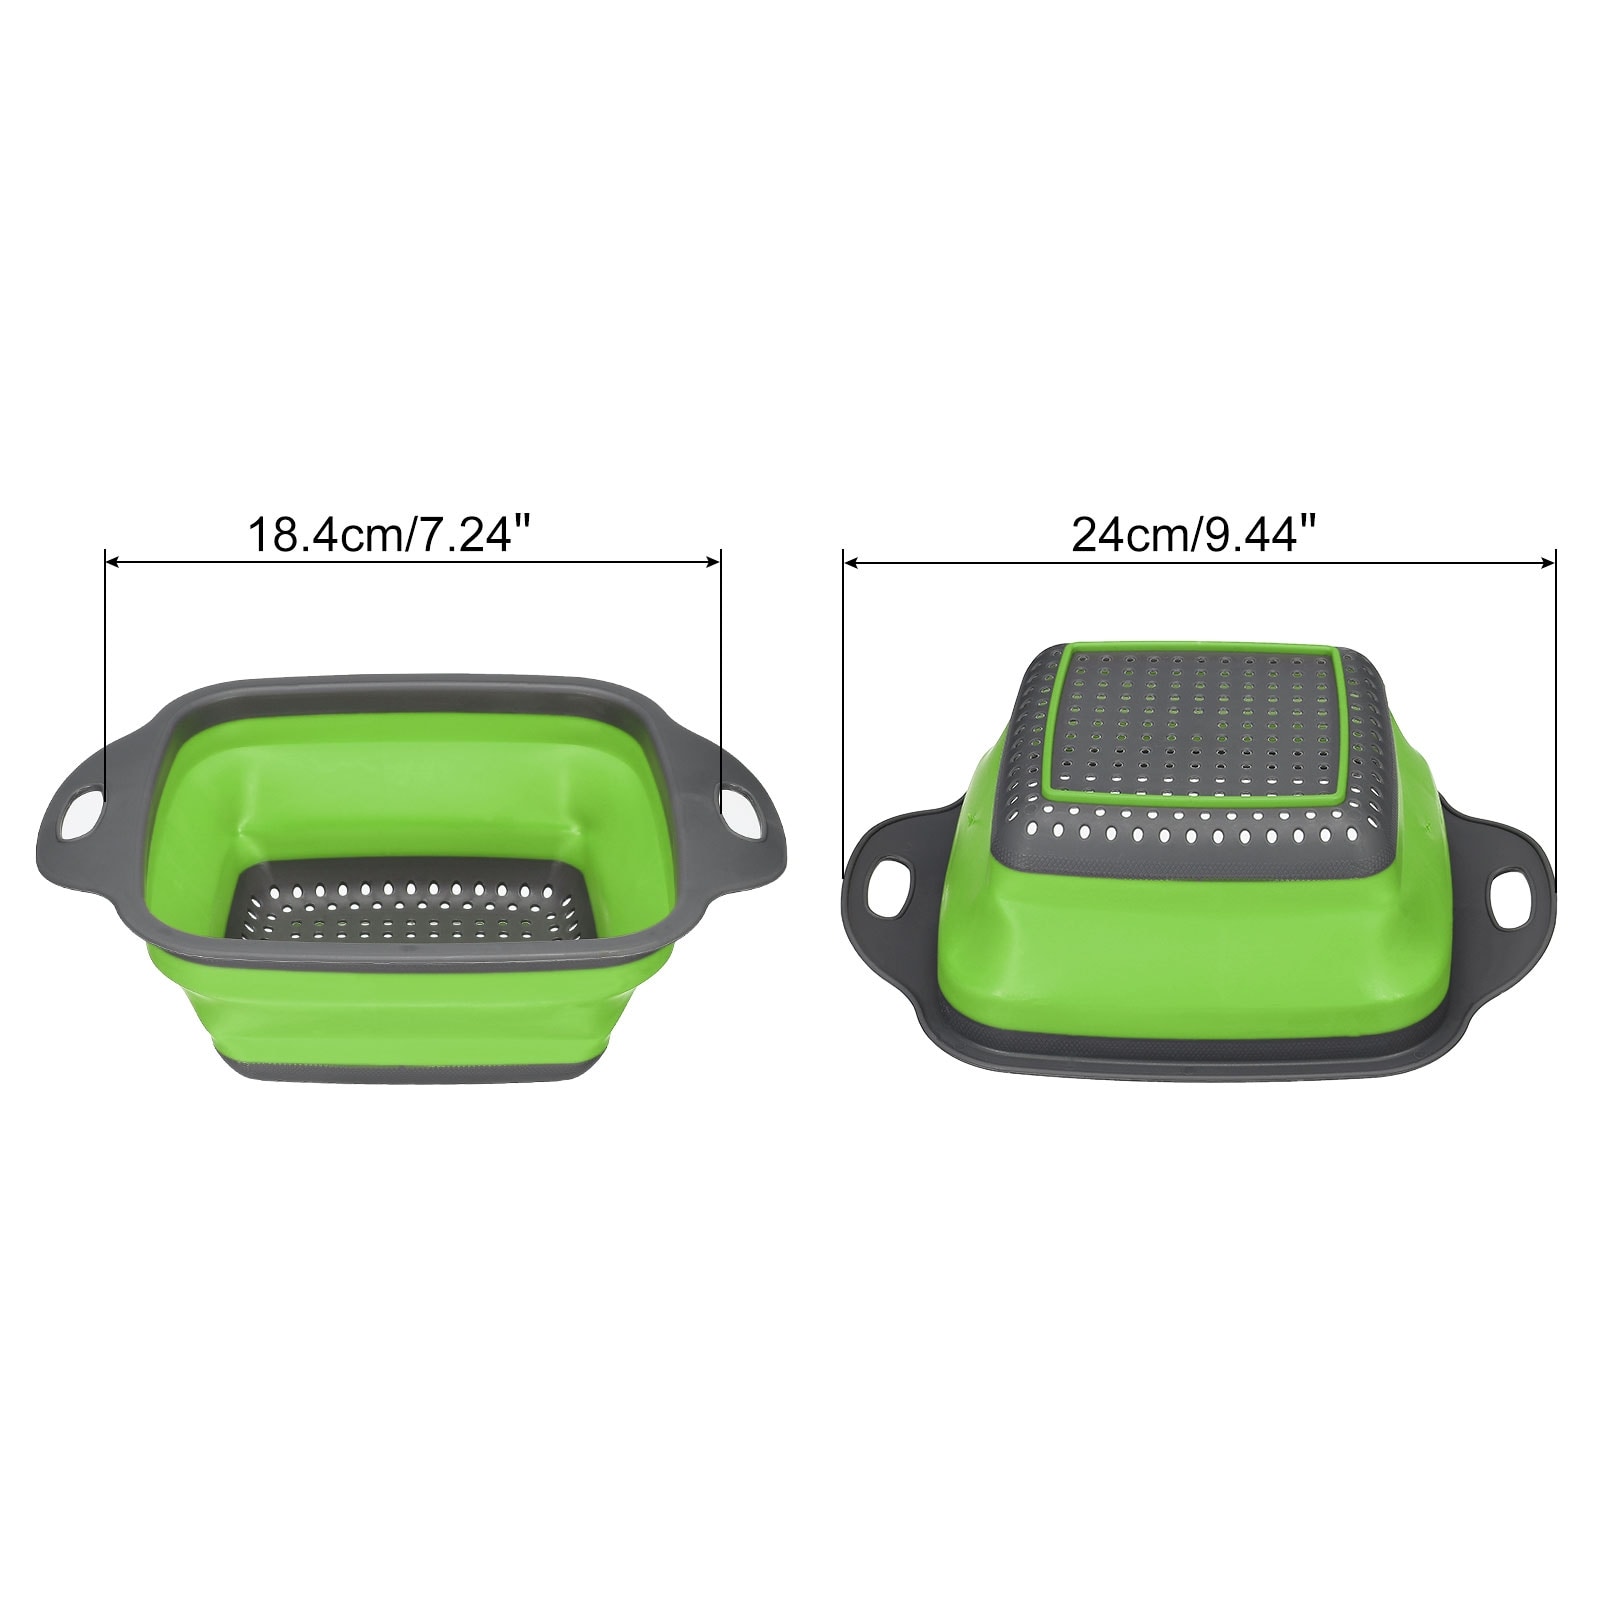 Collapsible Colander, Silicone Square Foldable Strainer with Handle - 24cm x 18.4cm x 7.5cm - Green